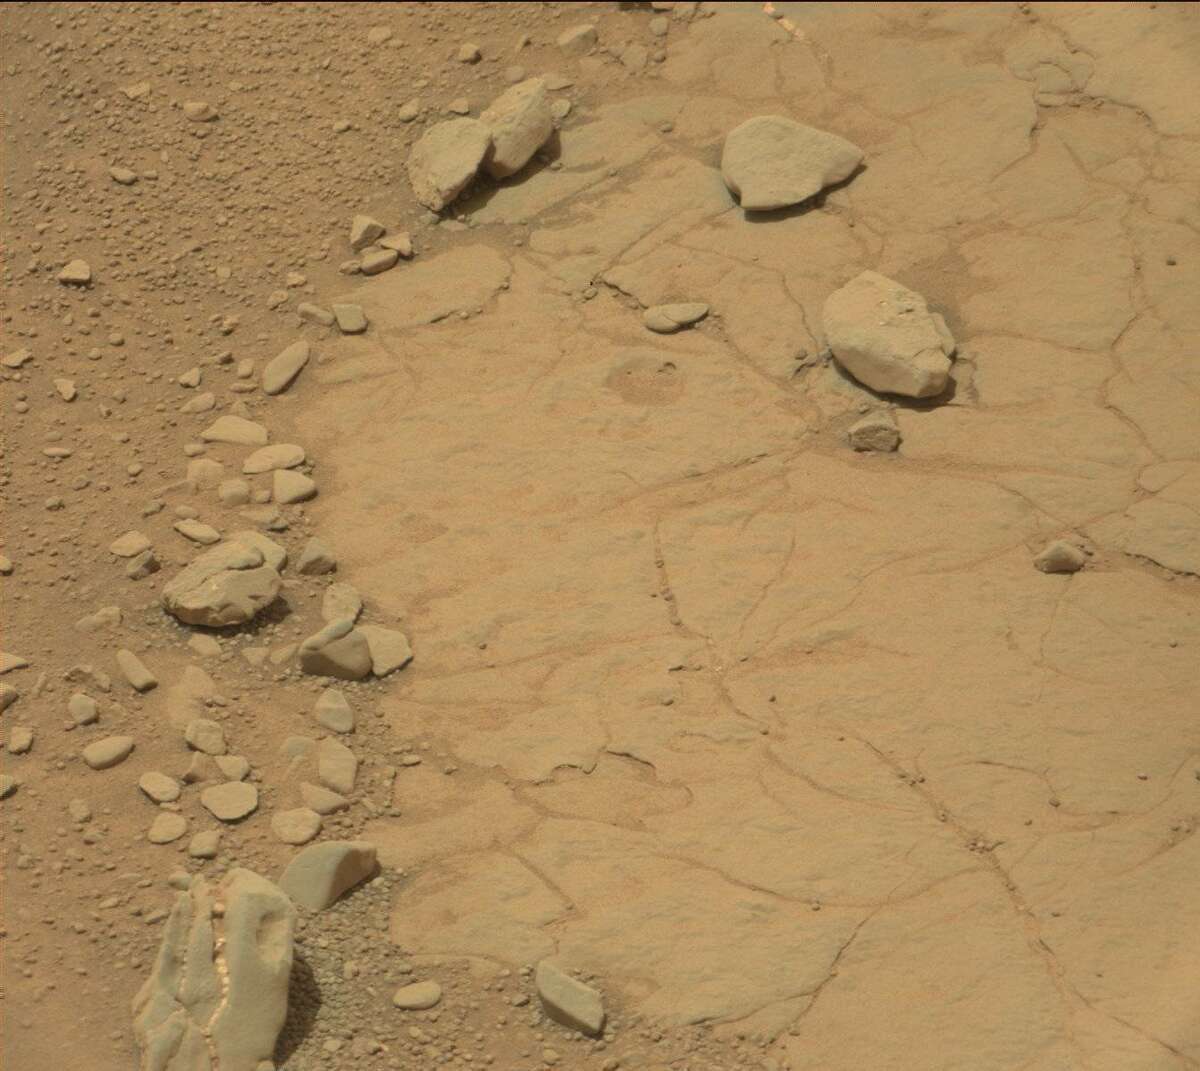 Dinosaur skull found on Mars? The Mars watchers at UFO Sightings Daily say this formation spotted in a NASA photo from Mars resembles a fossilized dinosaur head. We say it looks like a rock.Can you see it?